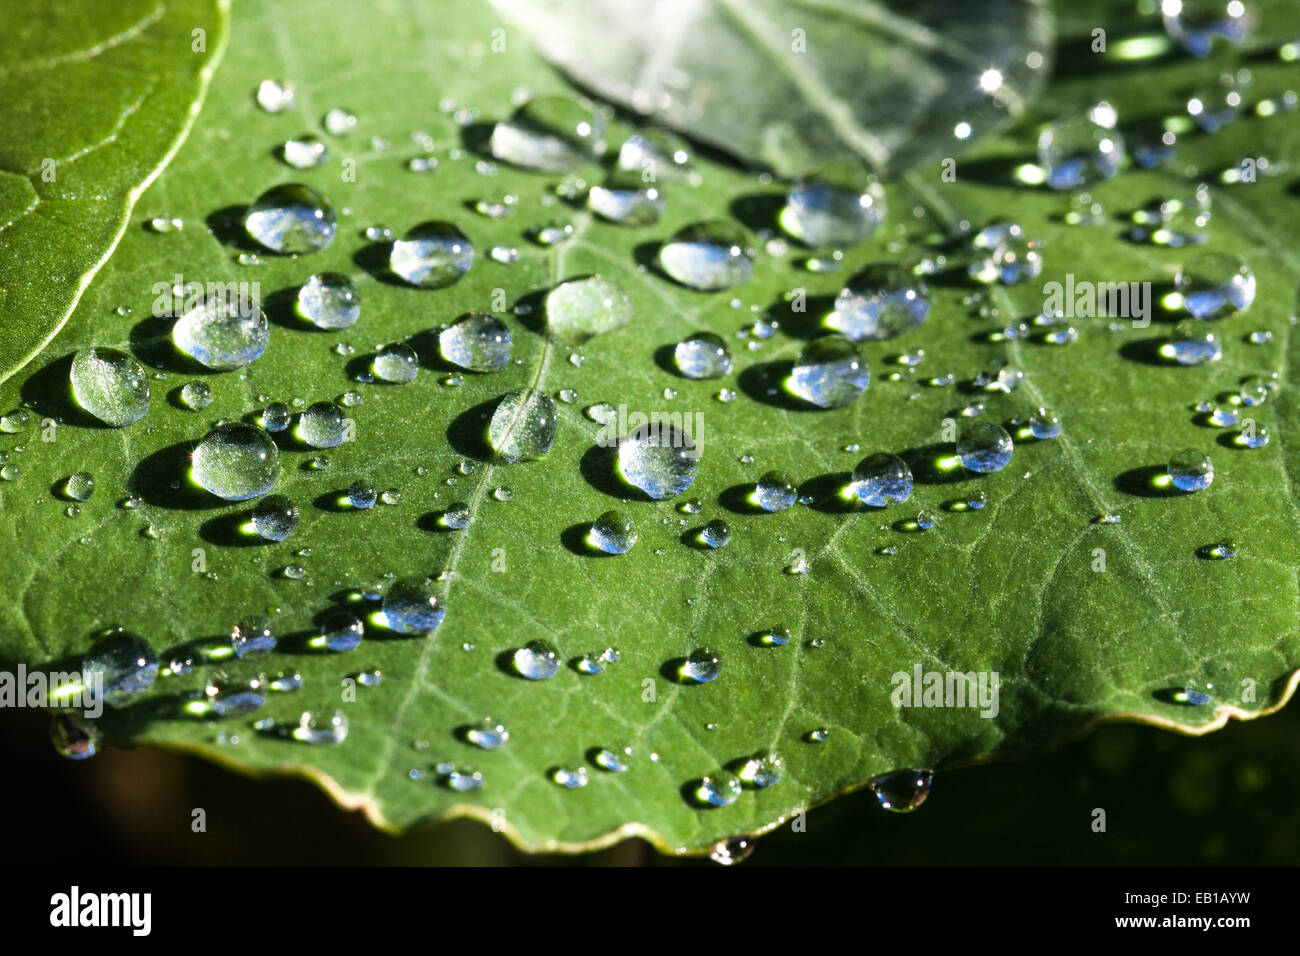 Dewdrops on a leave Stock Photo